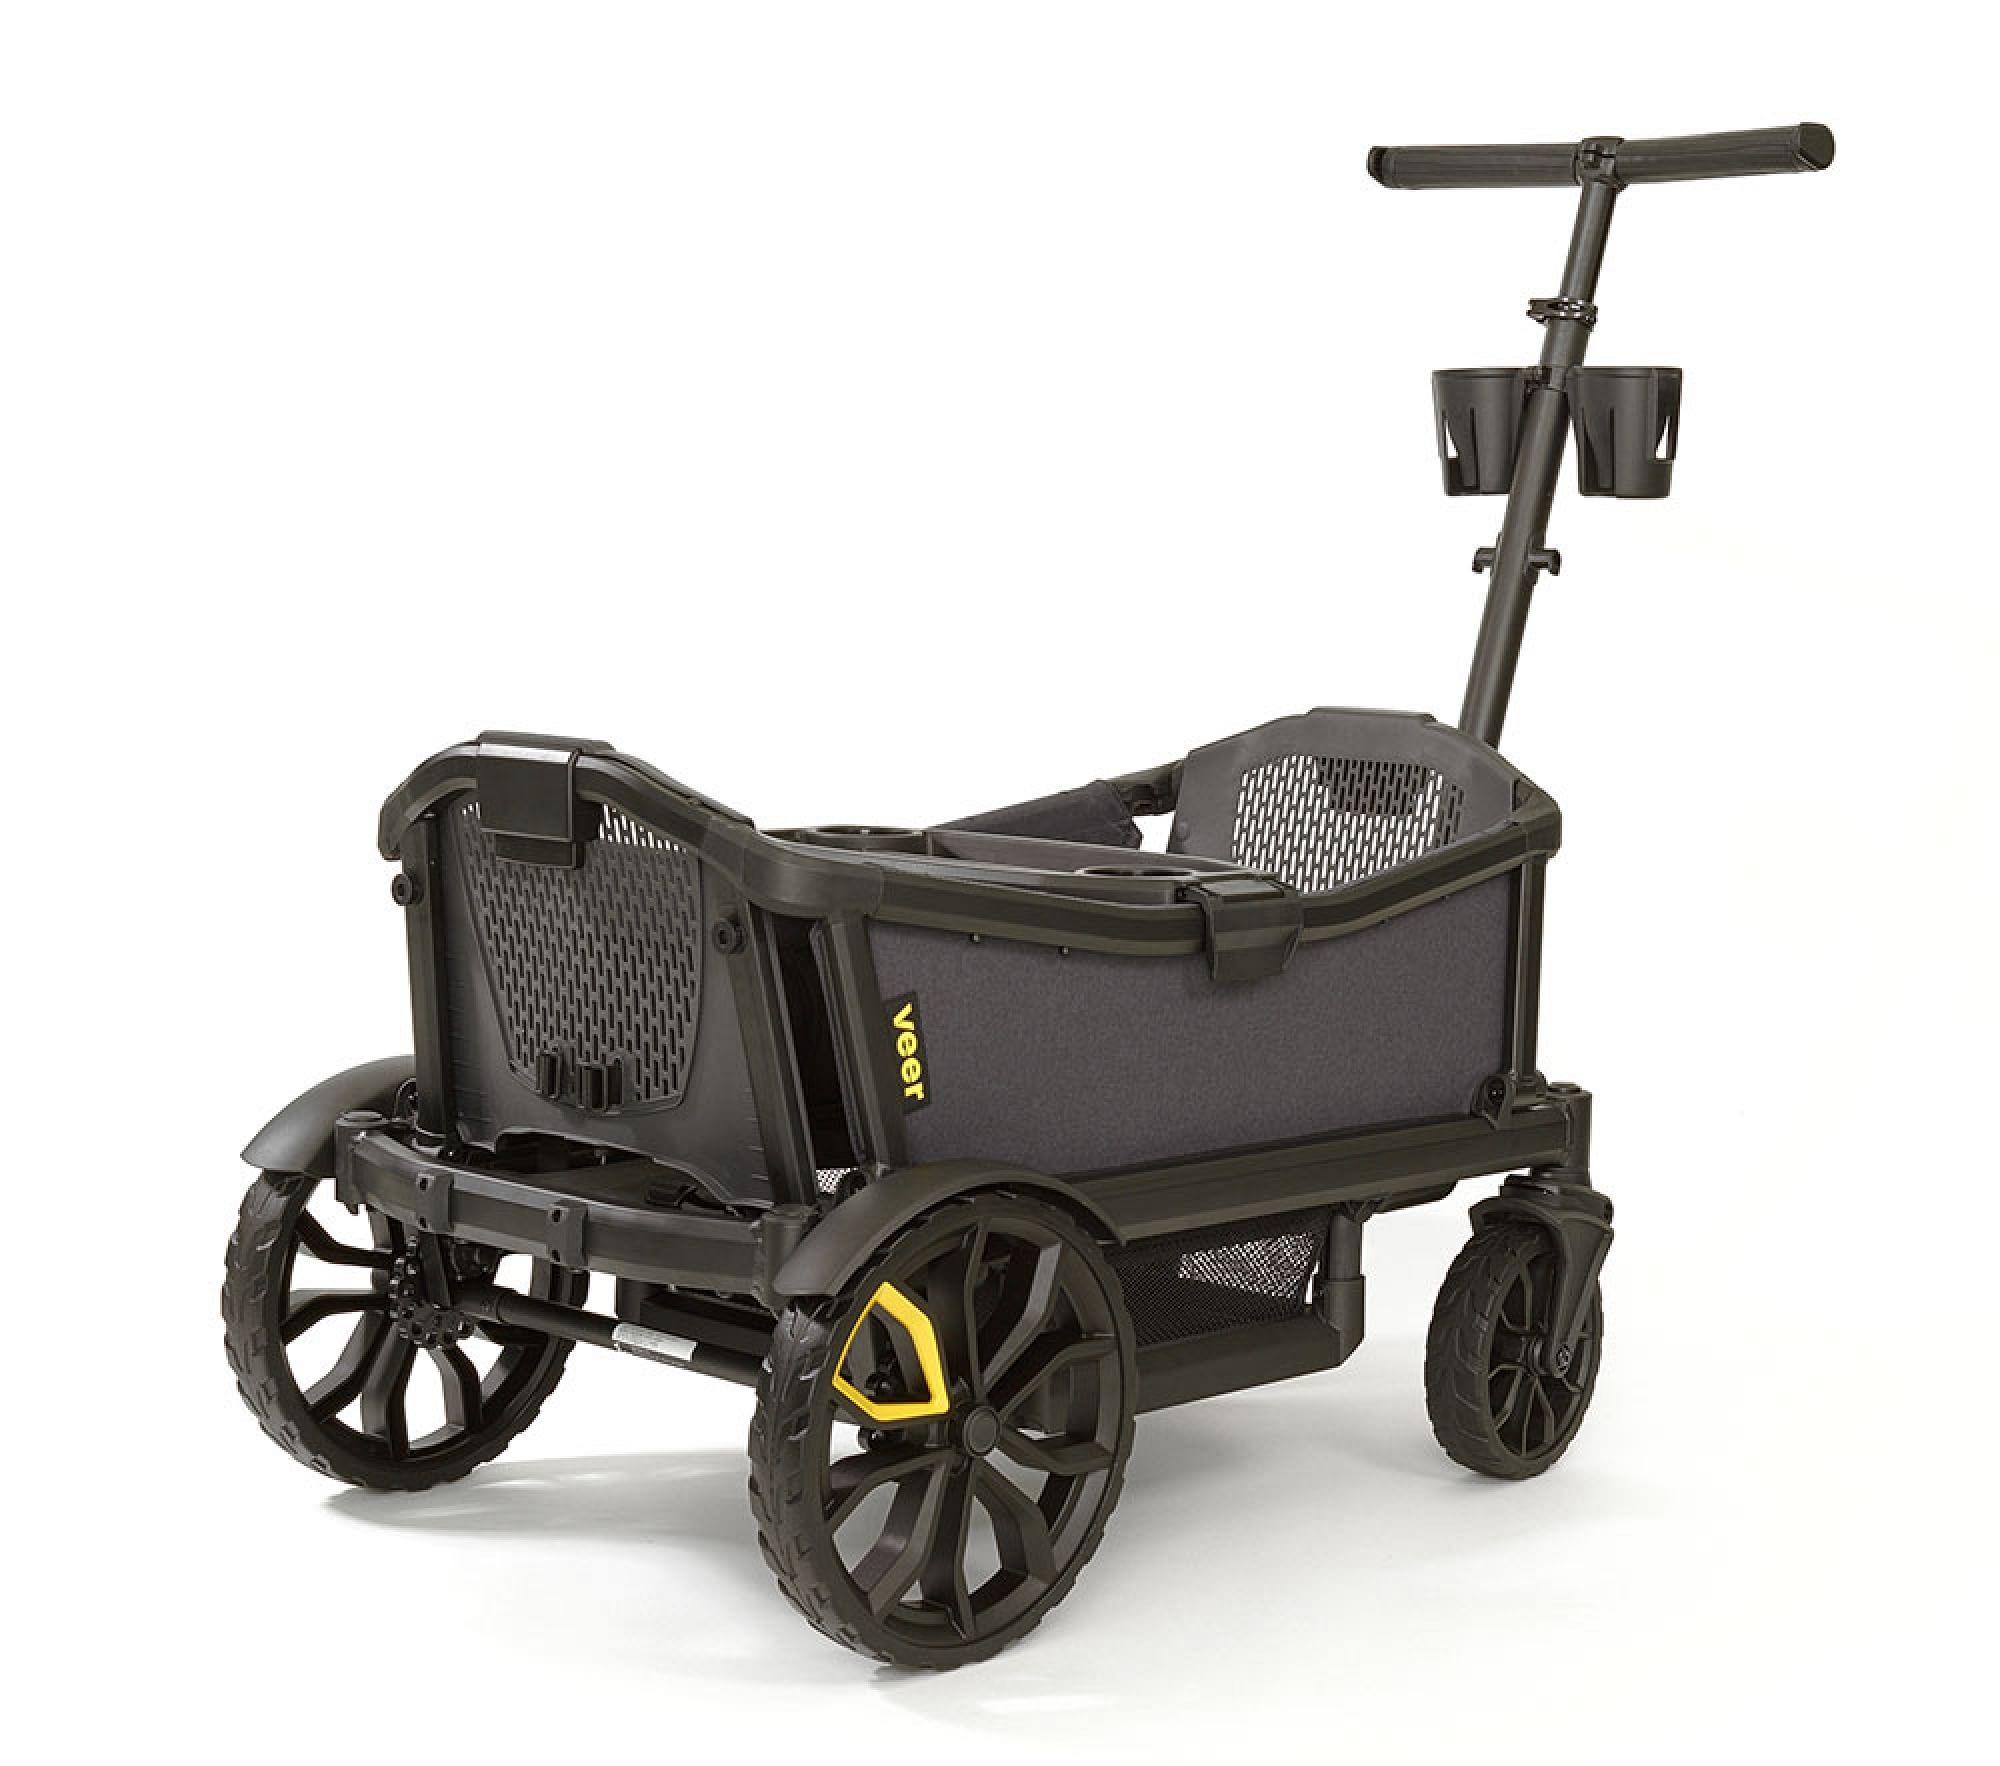 When it comes to uneven terrain, sandy beaches, or rocky mountain trails, a regular stroller just won’t cut it! Thankfully there is a solution that will survive any environment, while also providing extra storage space and convenience. Cue the Wagon Stroller! 3fbdbb4d veer